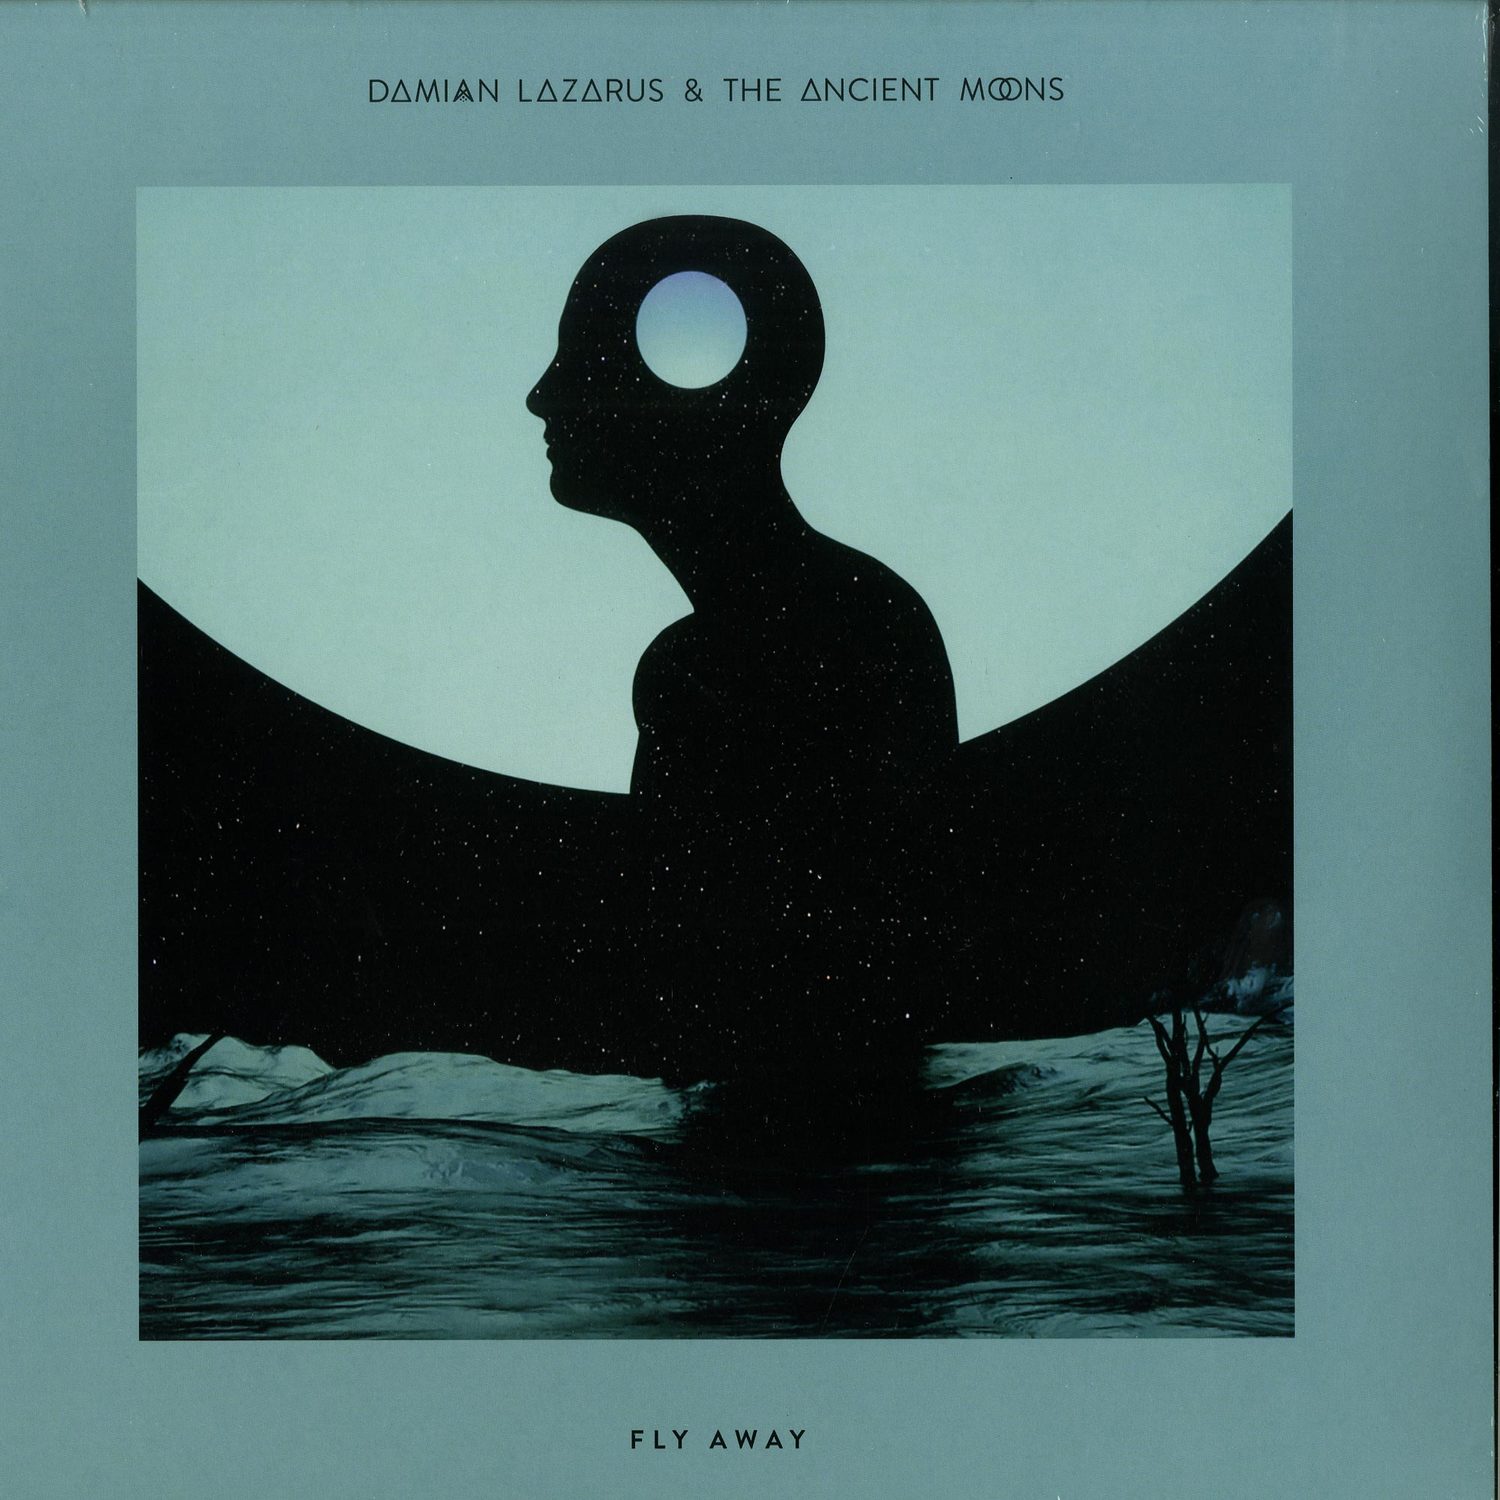 Damian Lazarus & The Ancient Moons - FLY AWAY